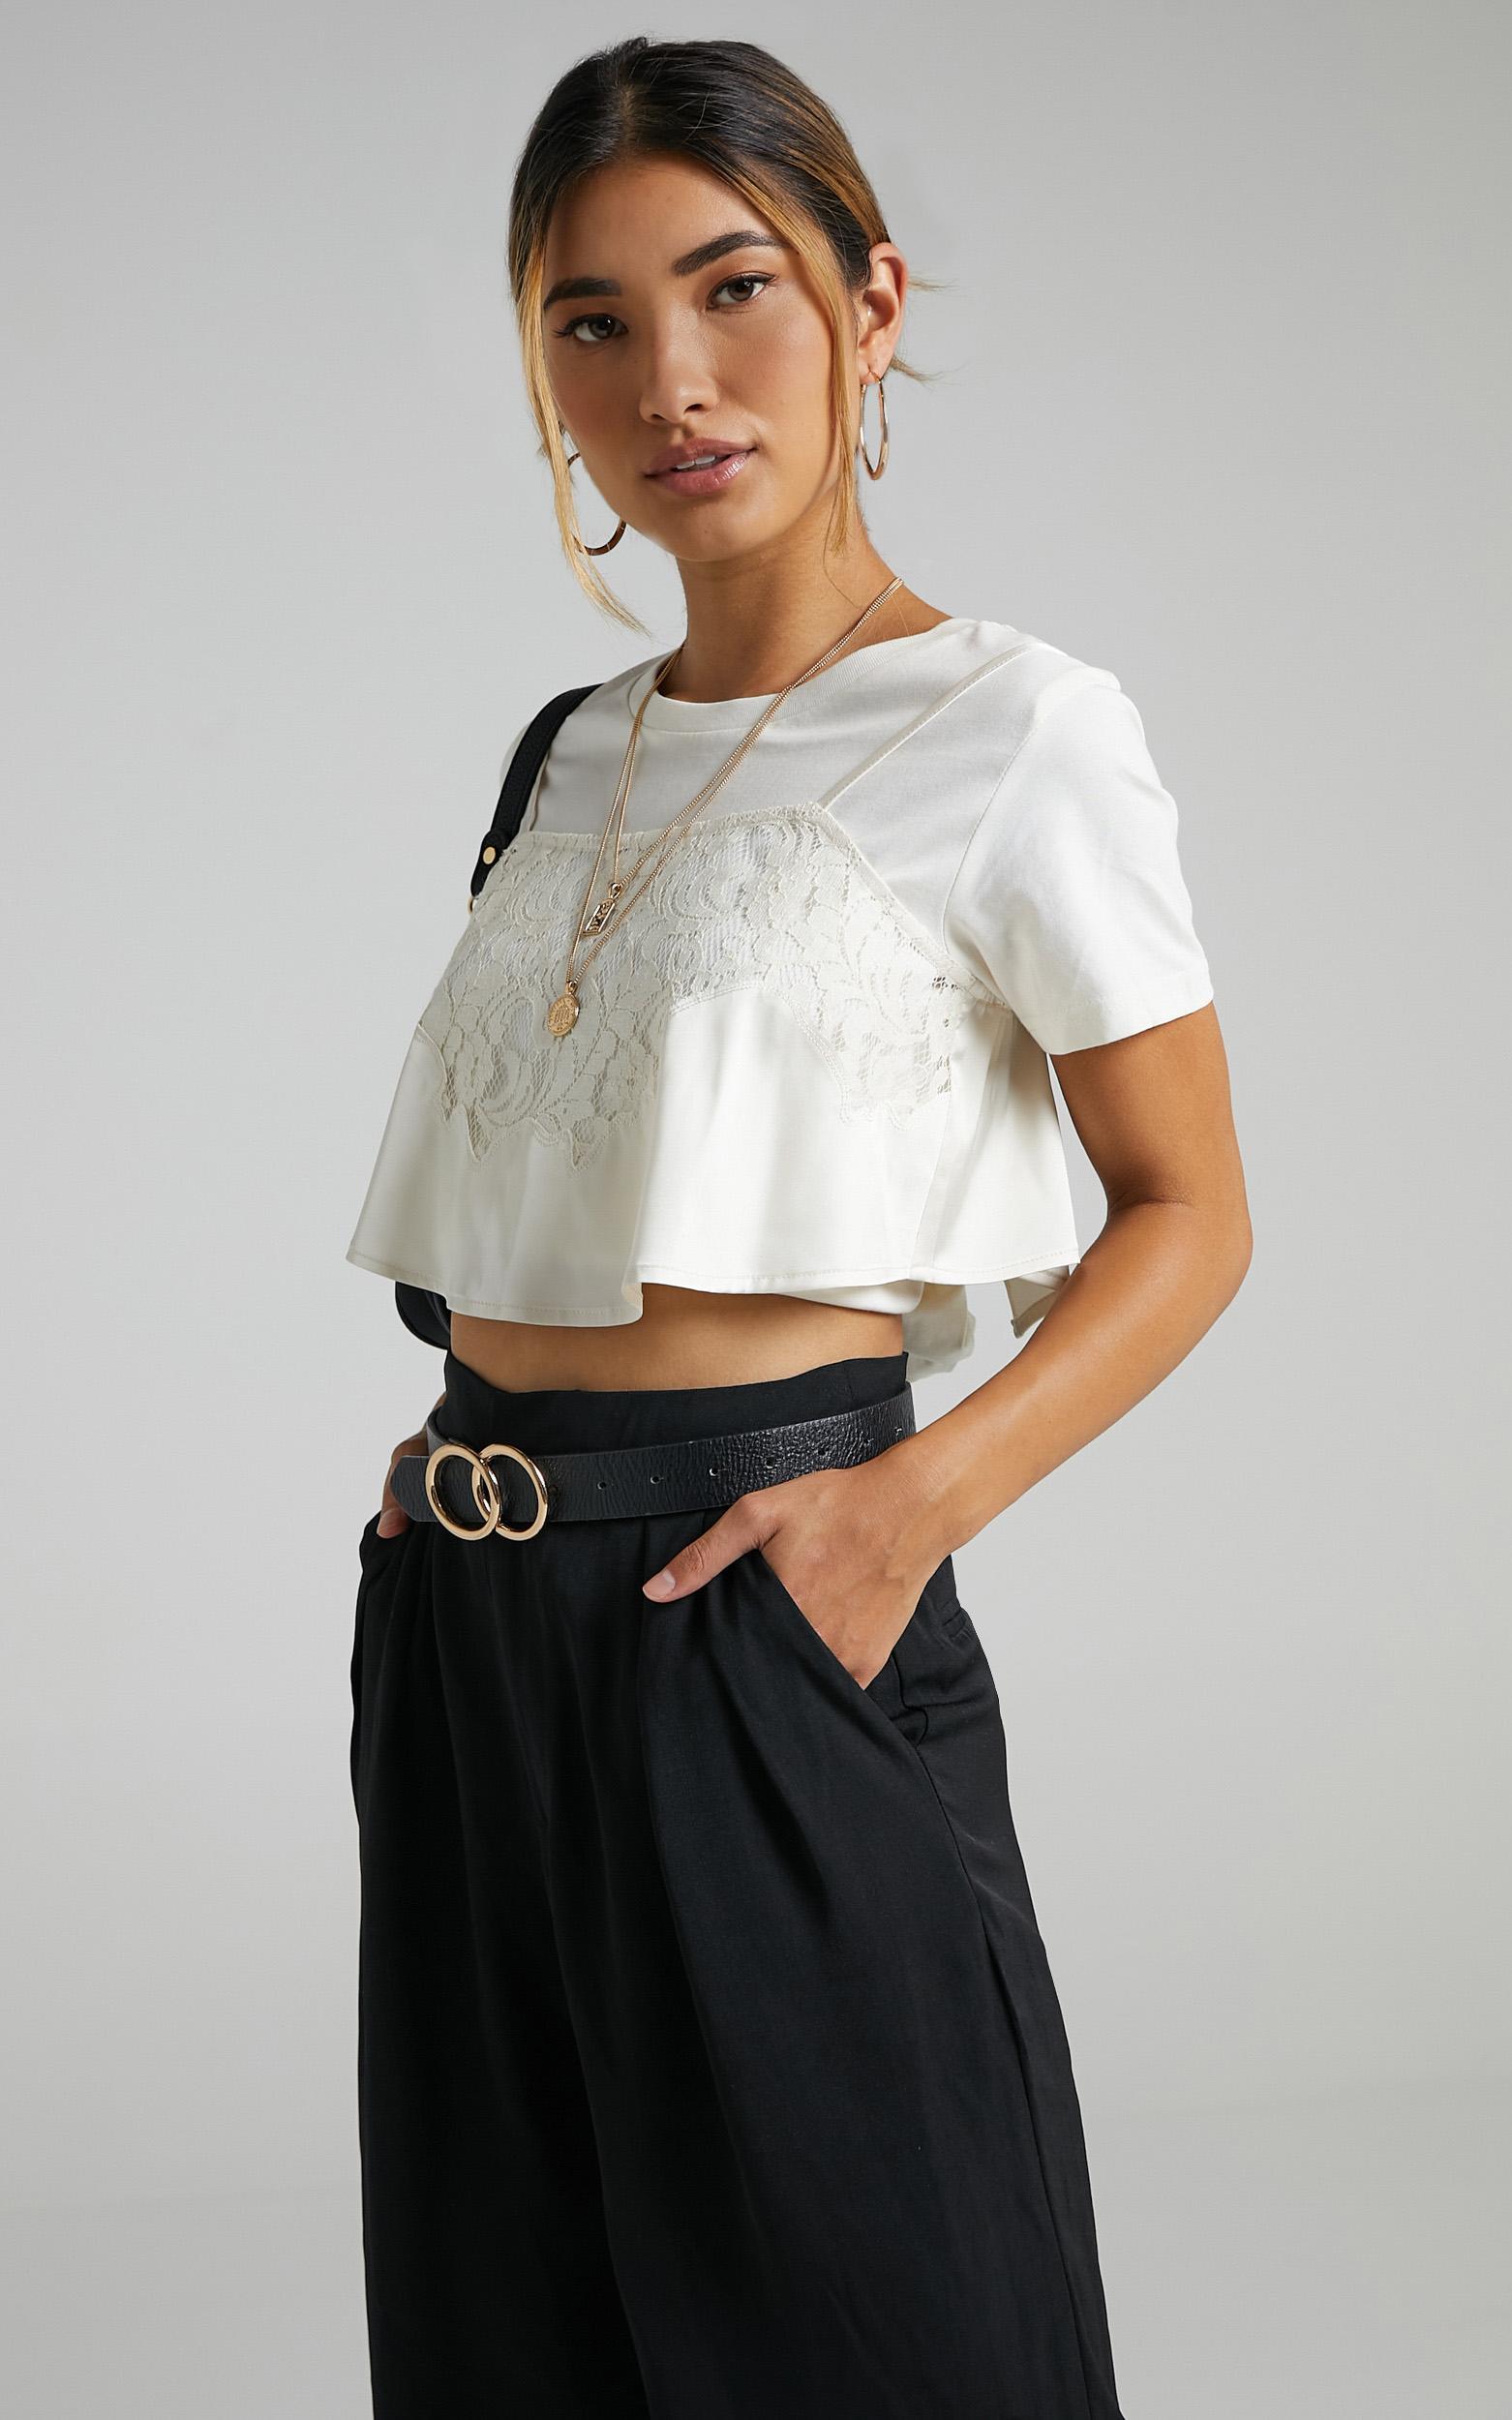 Hove Top in Cream - 06, CRE1, hi-res image number null